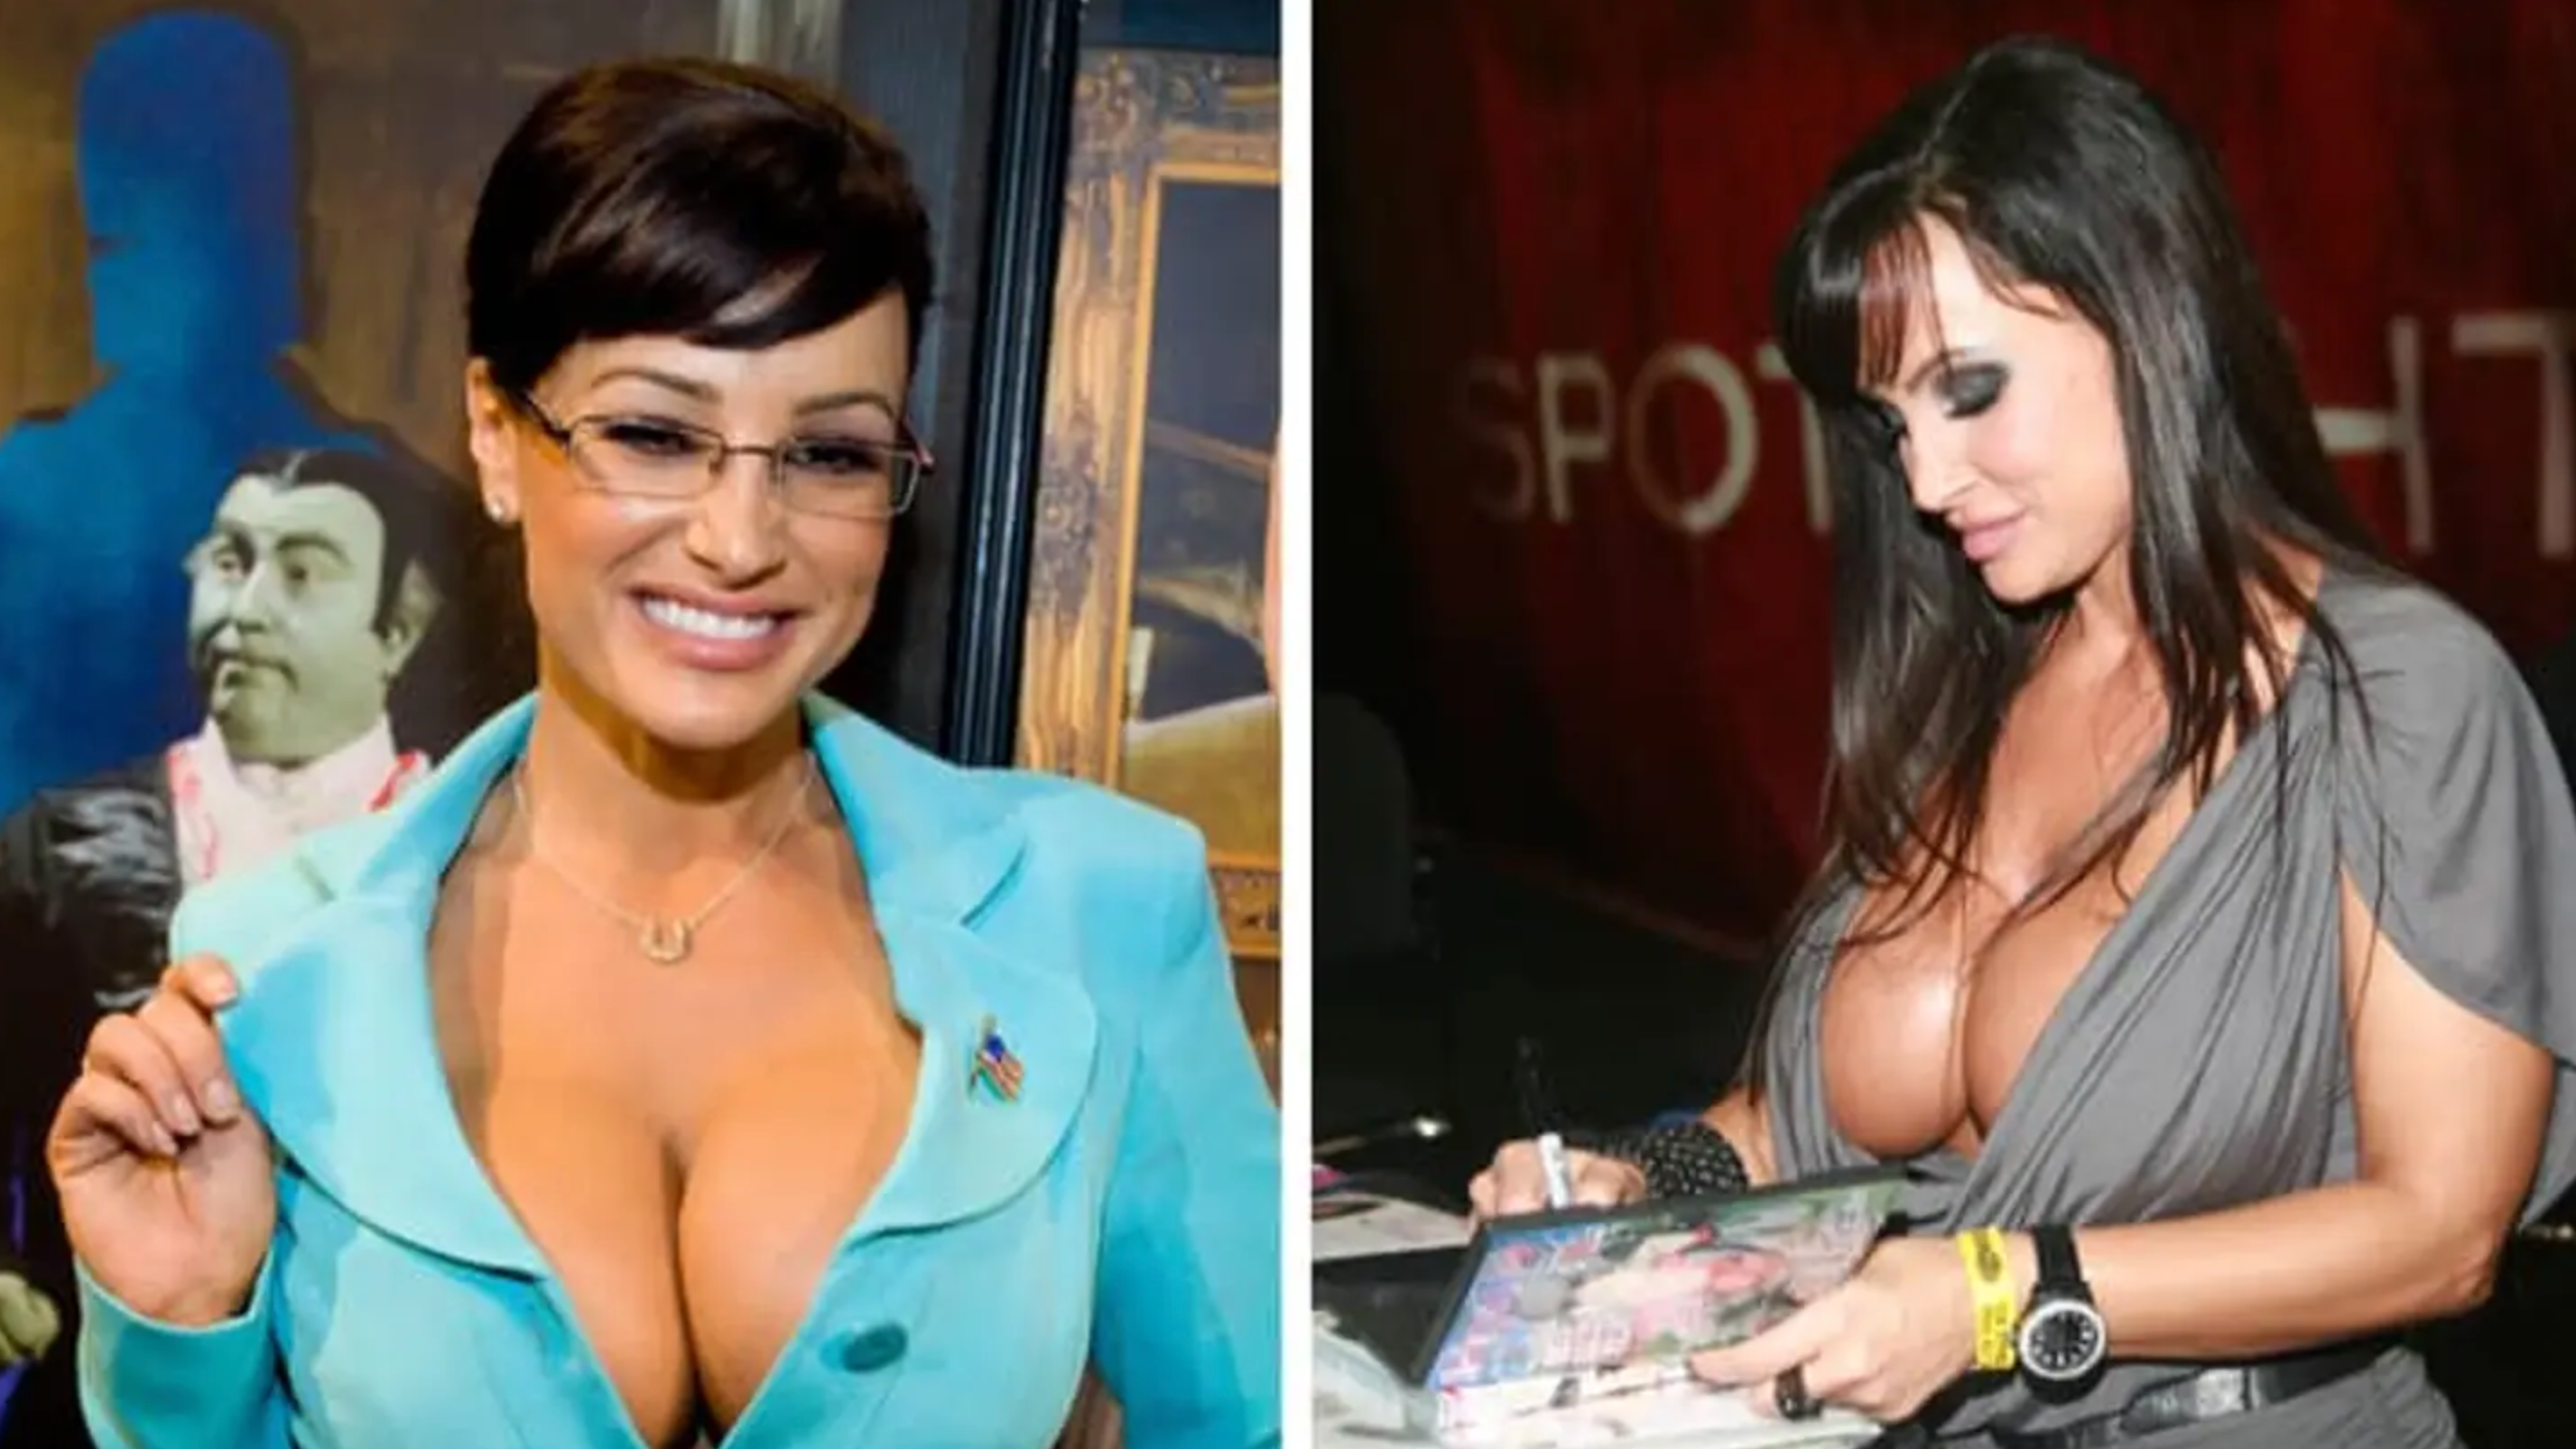 Pornstar 20 Year Girl 18 Year Boy - Lisa Ann reveals which athletes are the best in the bedroom